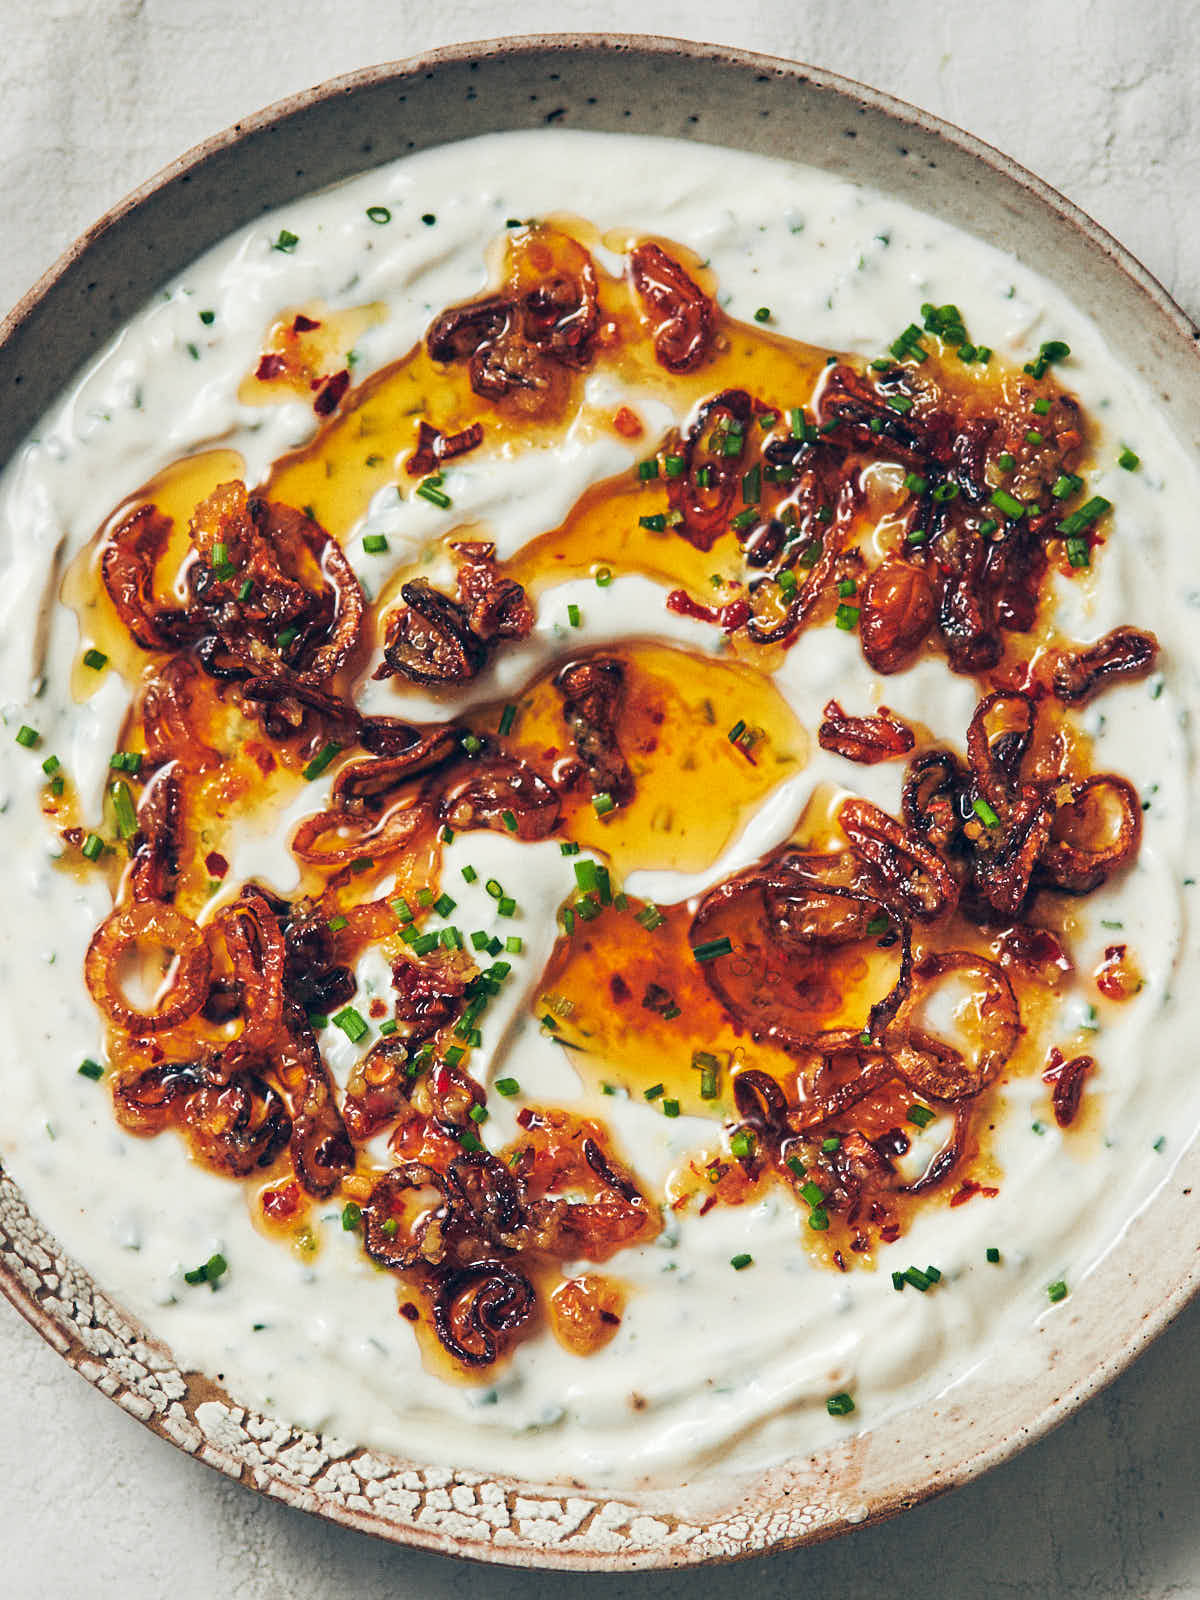 A ceramic serving bowl of Greek yogurt onion dip topped with chili garlic oil, fresh chives, and fried shallots